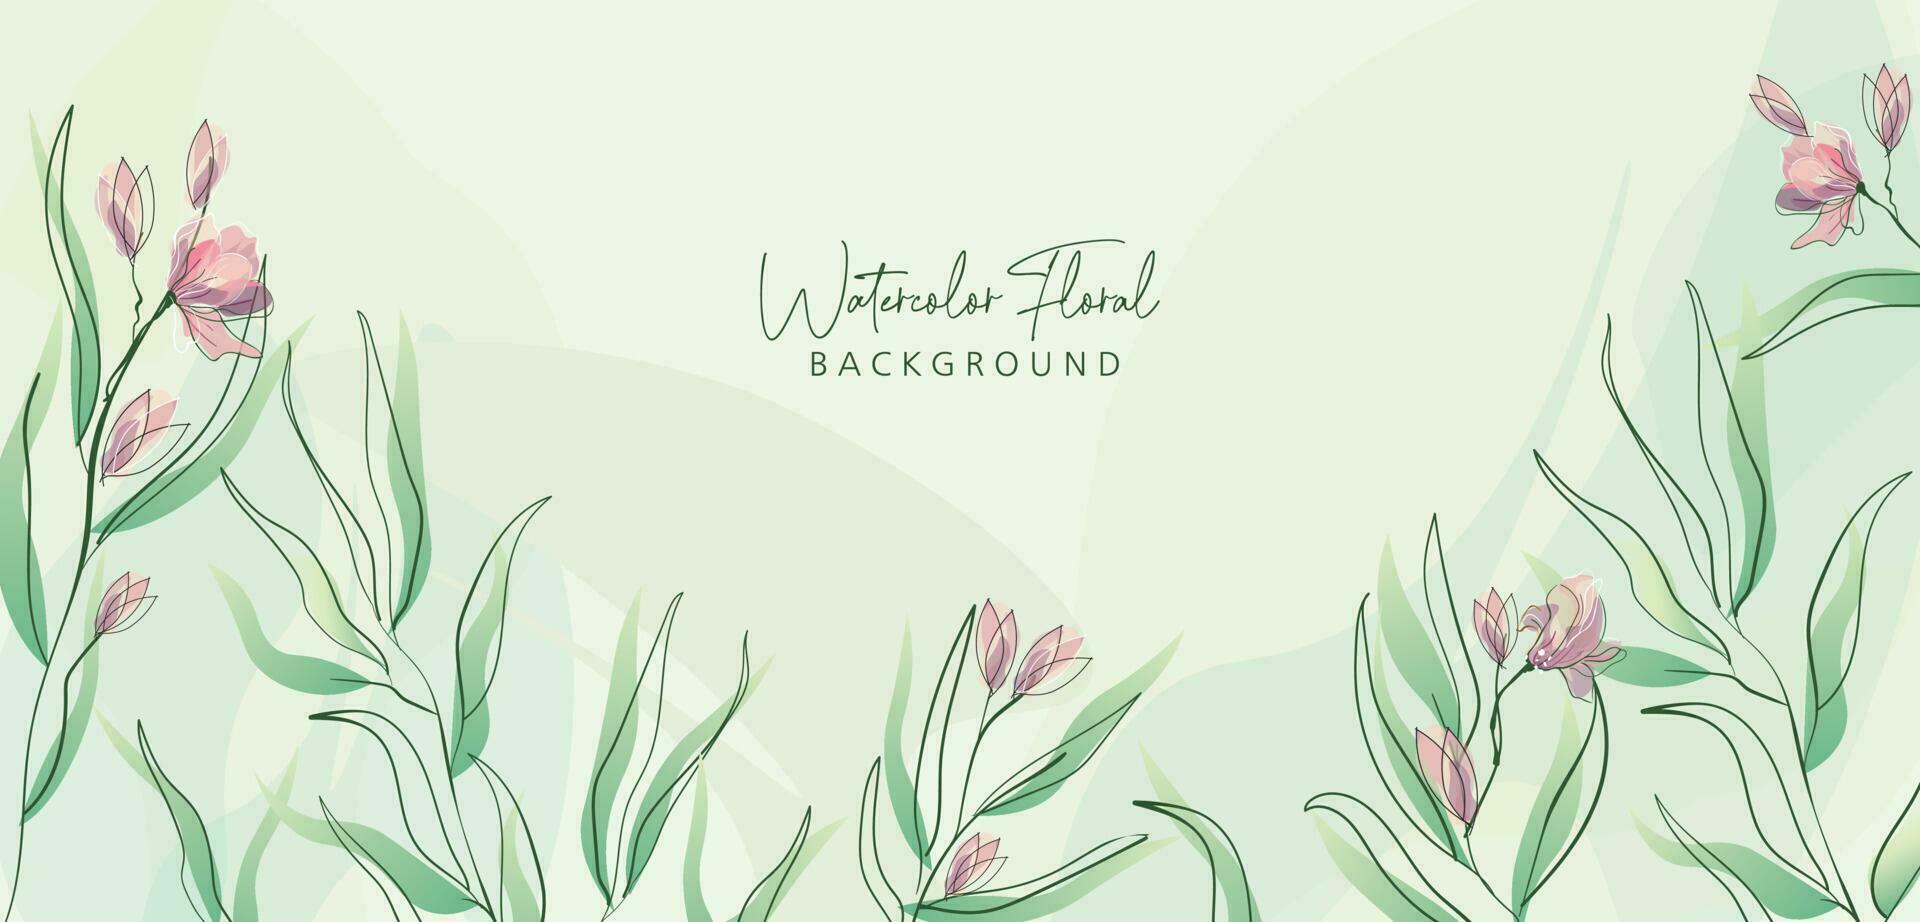 Watercolor bakground with leaves vector